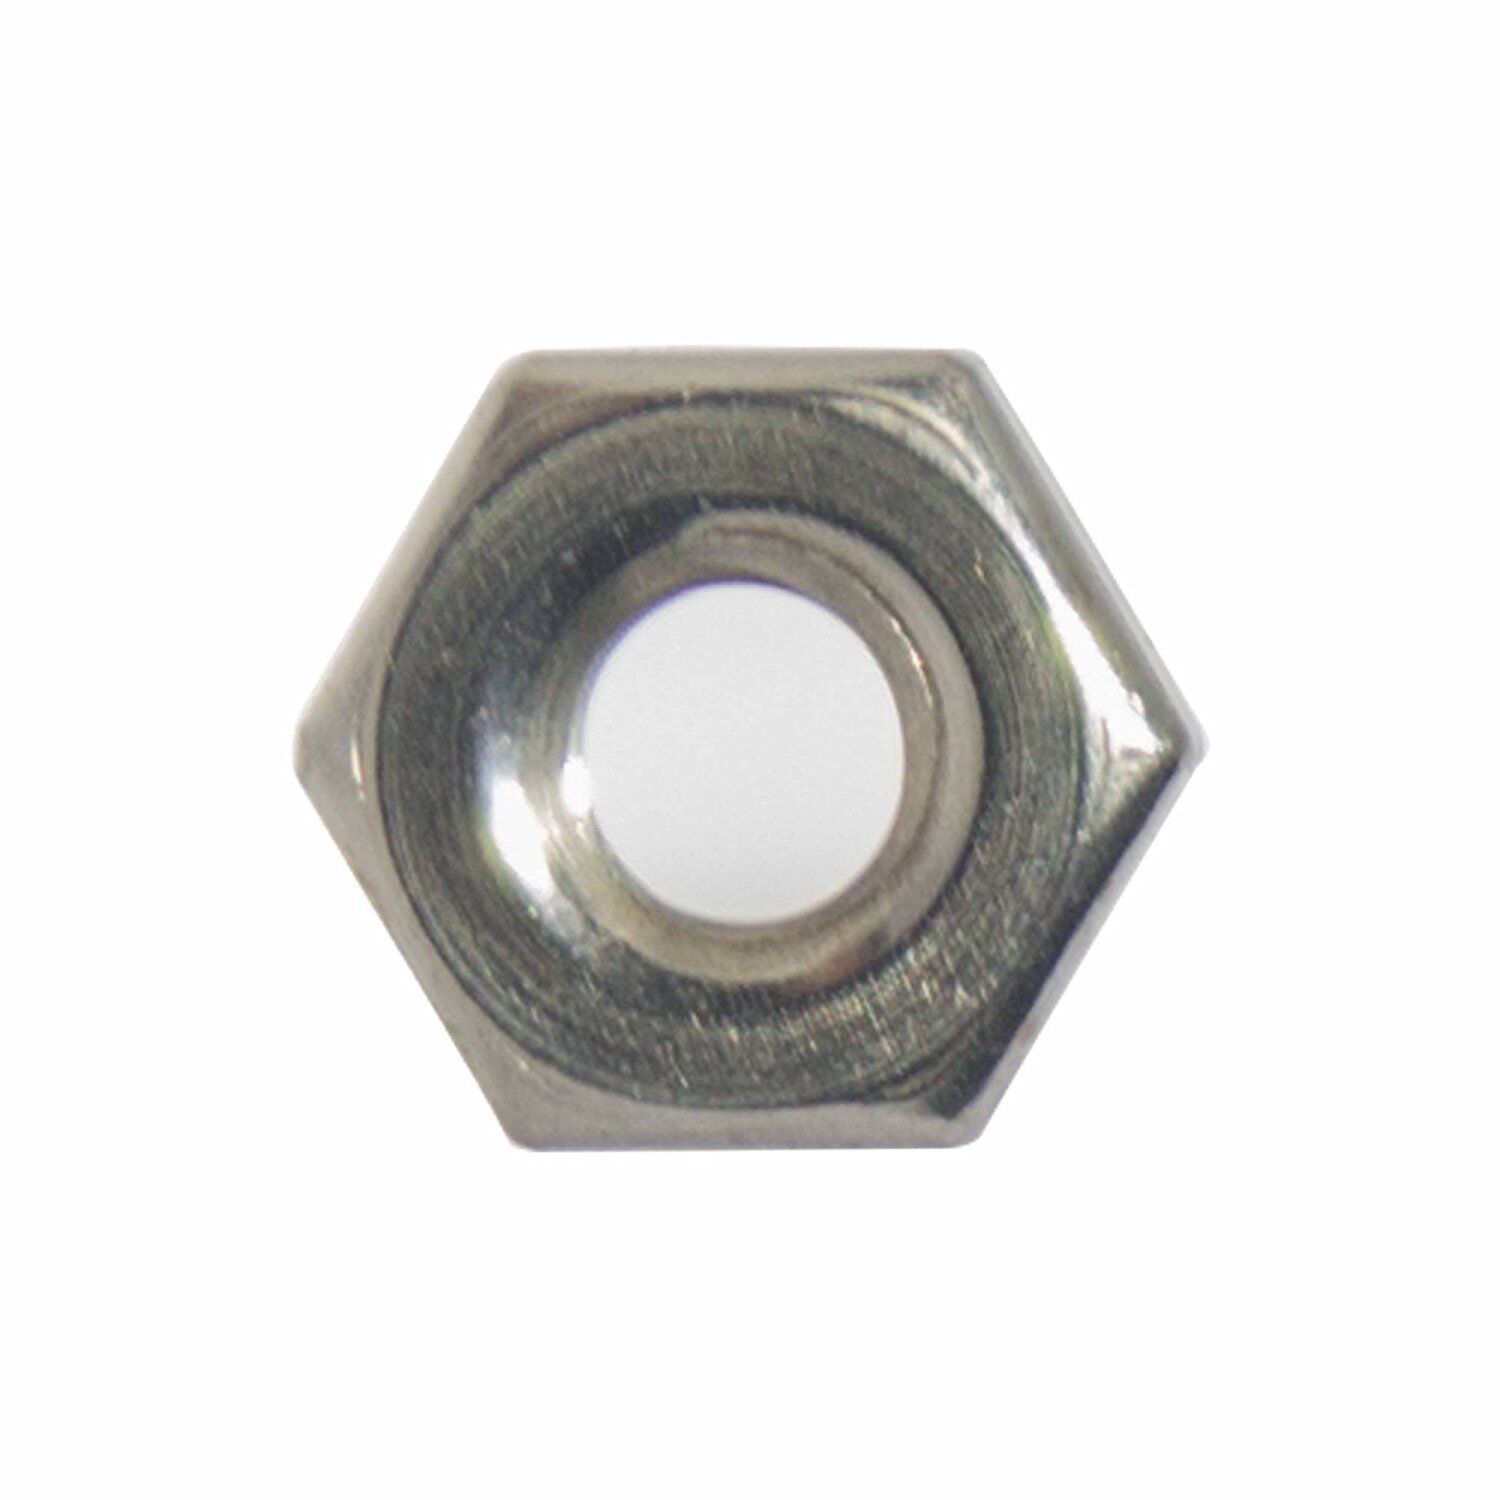 10-32 Machine Screw Hex Nuts Stainless Steel 18-8 Qty 100